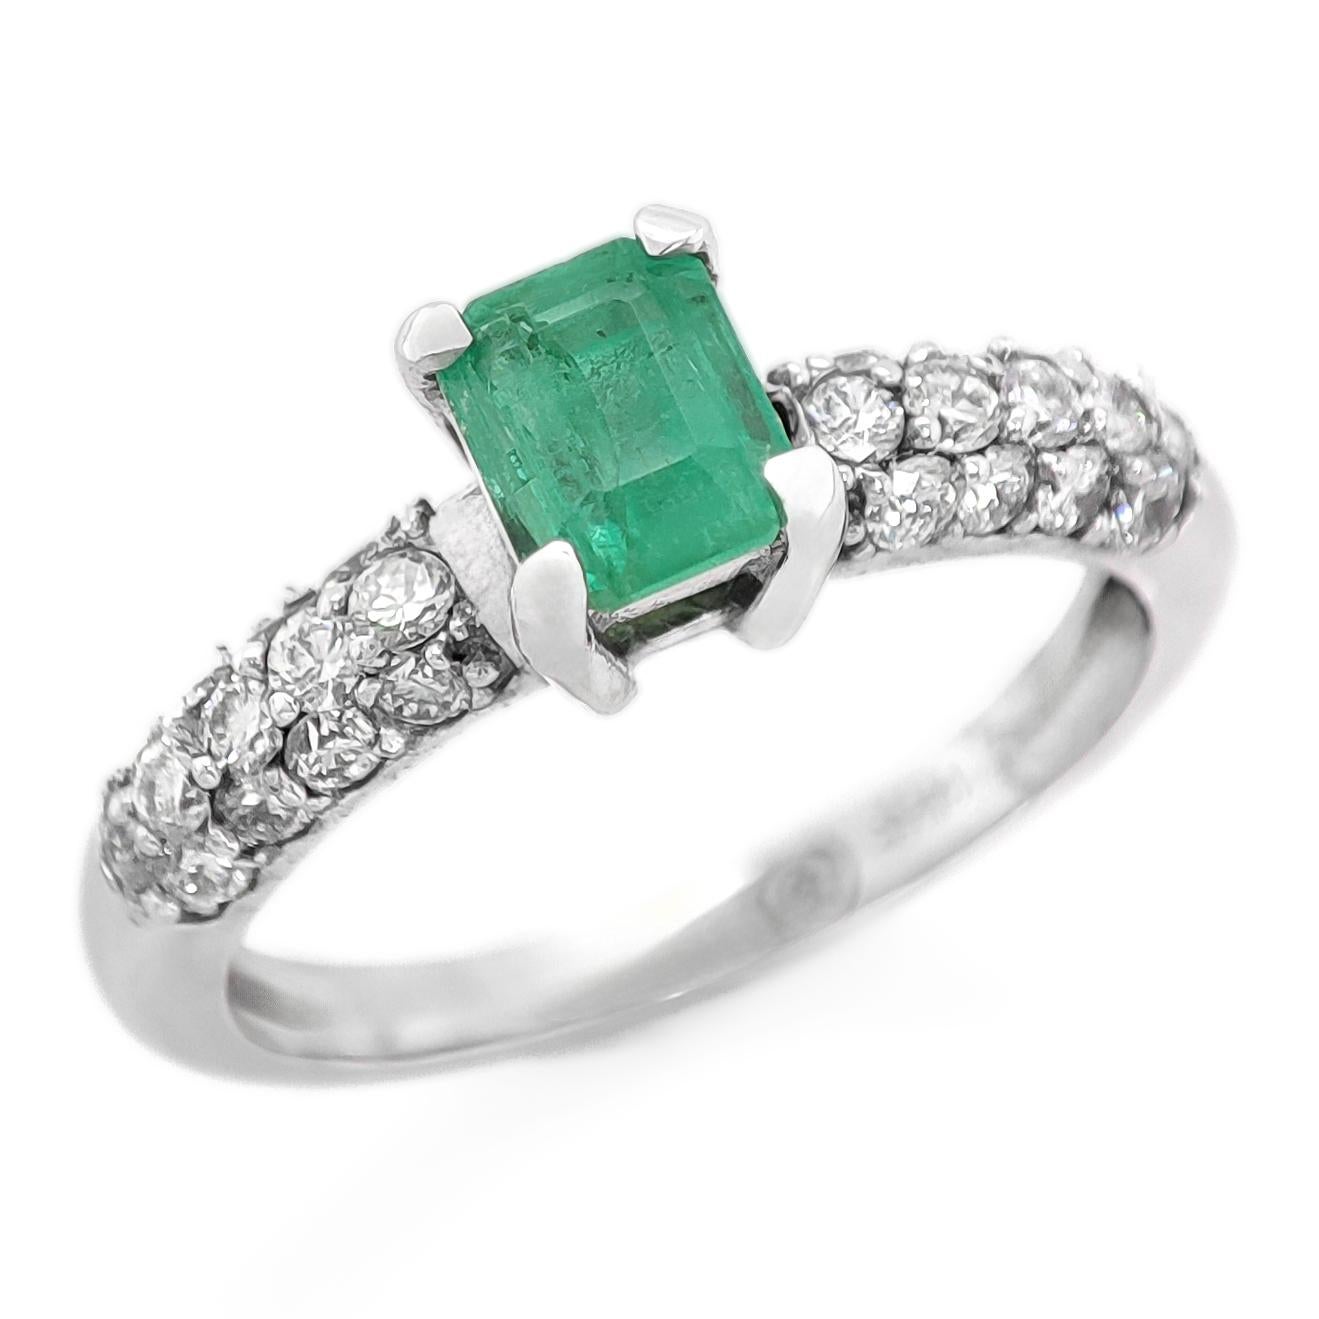 FOR US BUYER NO VAT

This charming ring features a 0.38 carat green emerald as its focal point, displaying the enchanting green hue that emeralds are known for.

Enhancing the emerald's beauty are 26 diamonds, totaling 0.40 carats. These diamonds